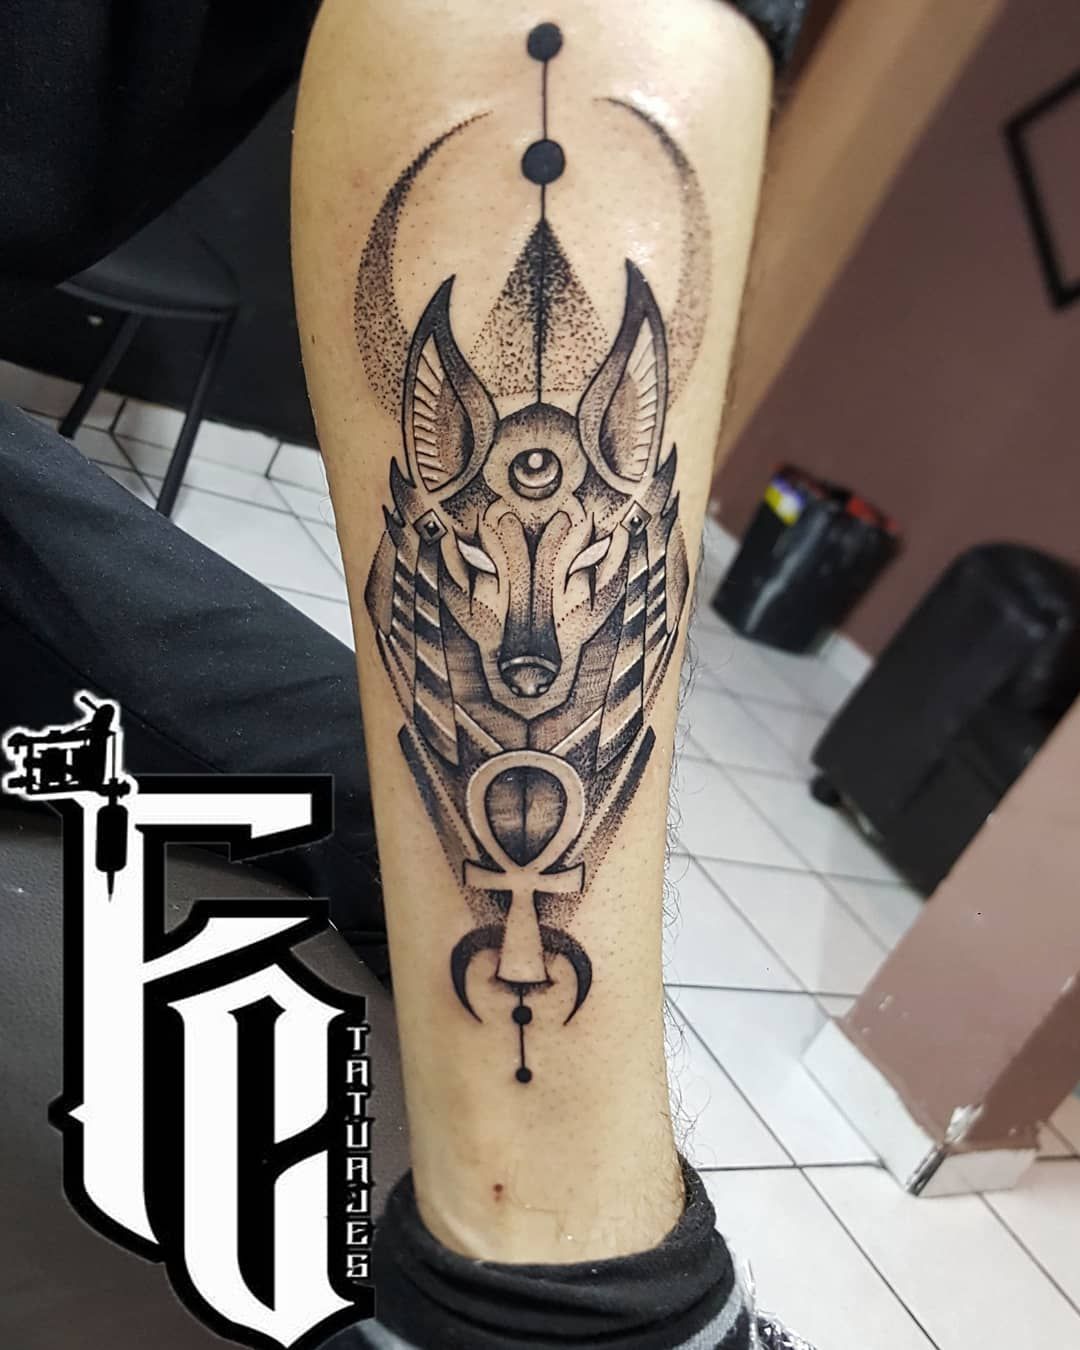 Anubis Meaning Tattoo: Understanding the Symbolism of the Egyptian God of the Afterlife